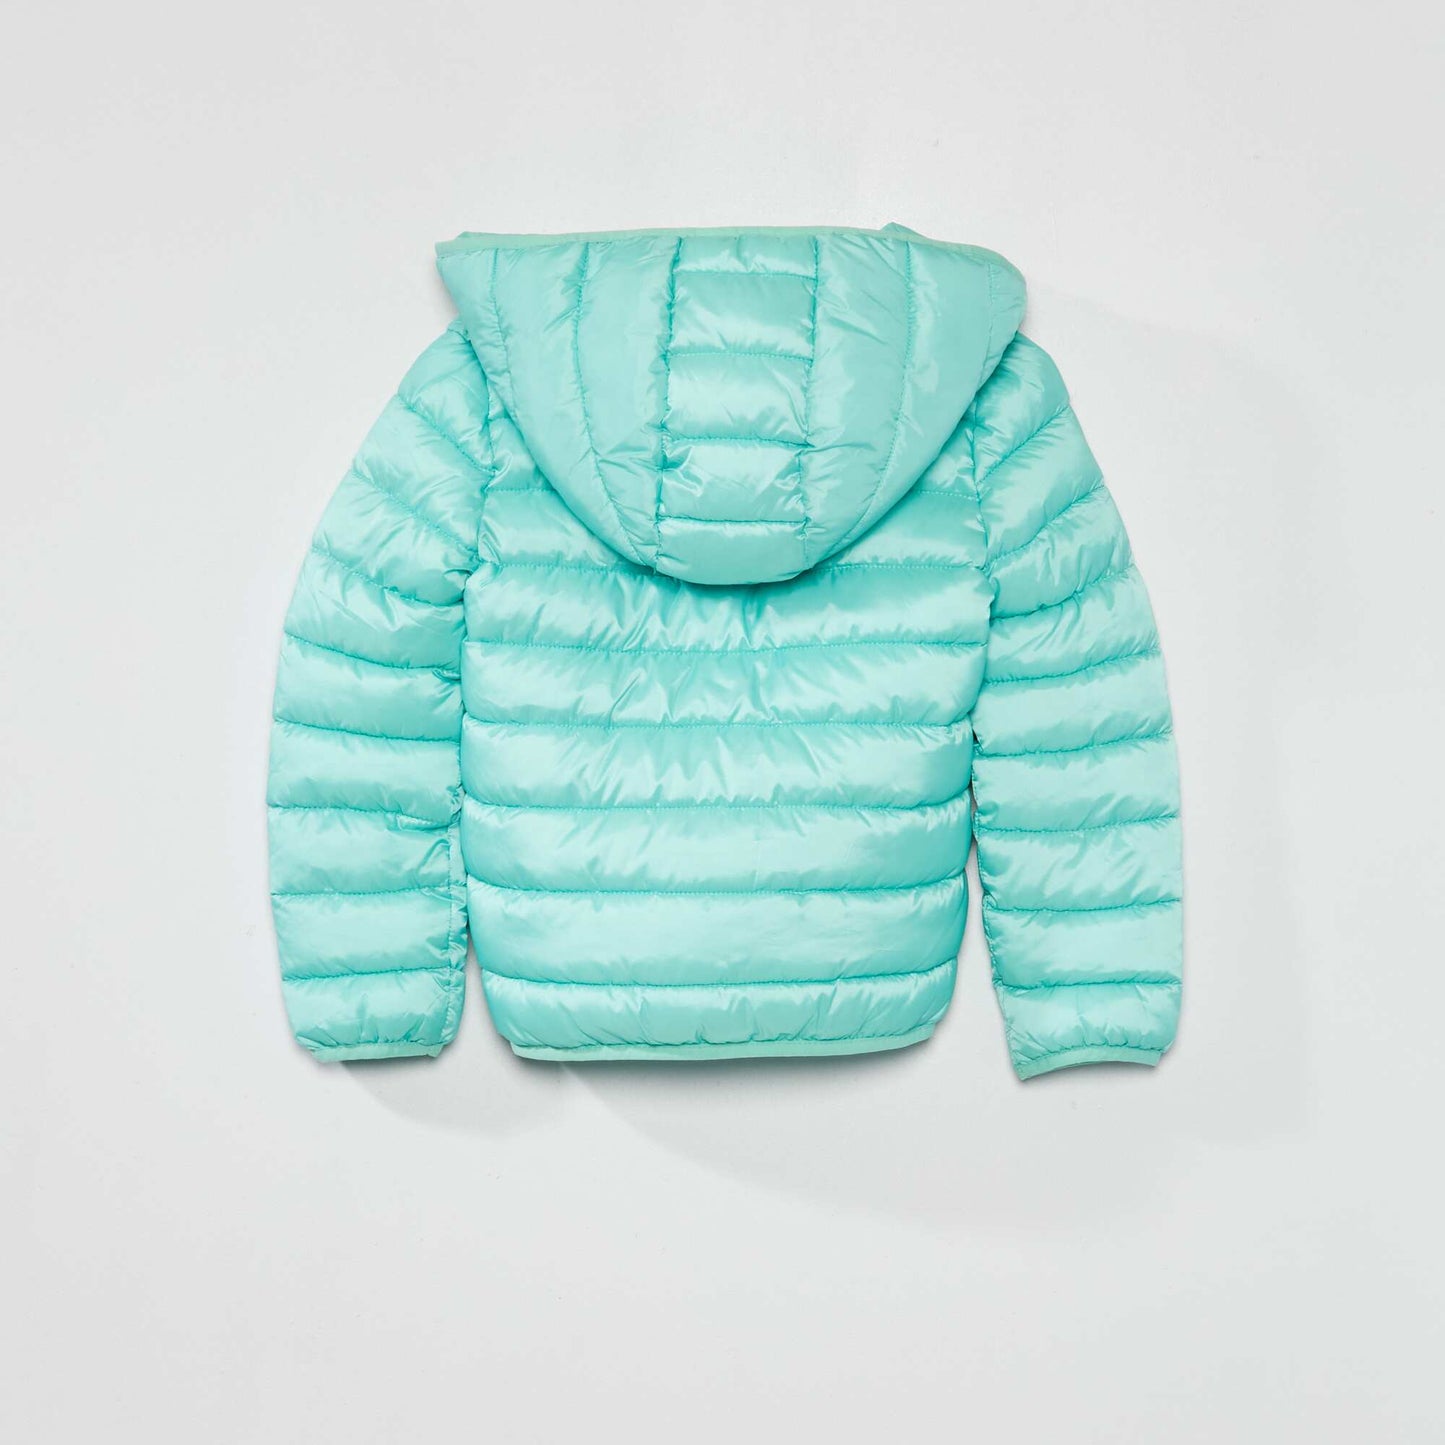 Padded jacket made from recycled bottles PARTY GREEN